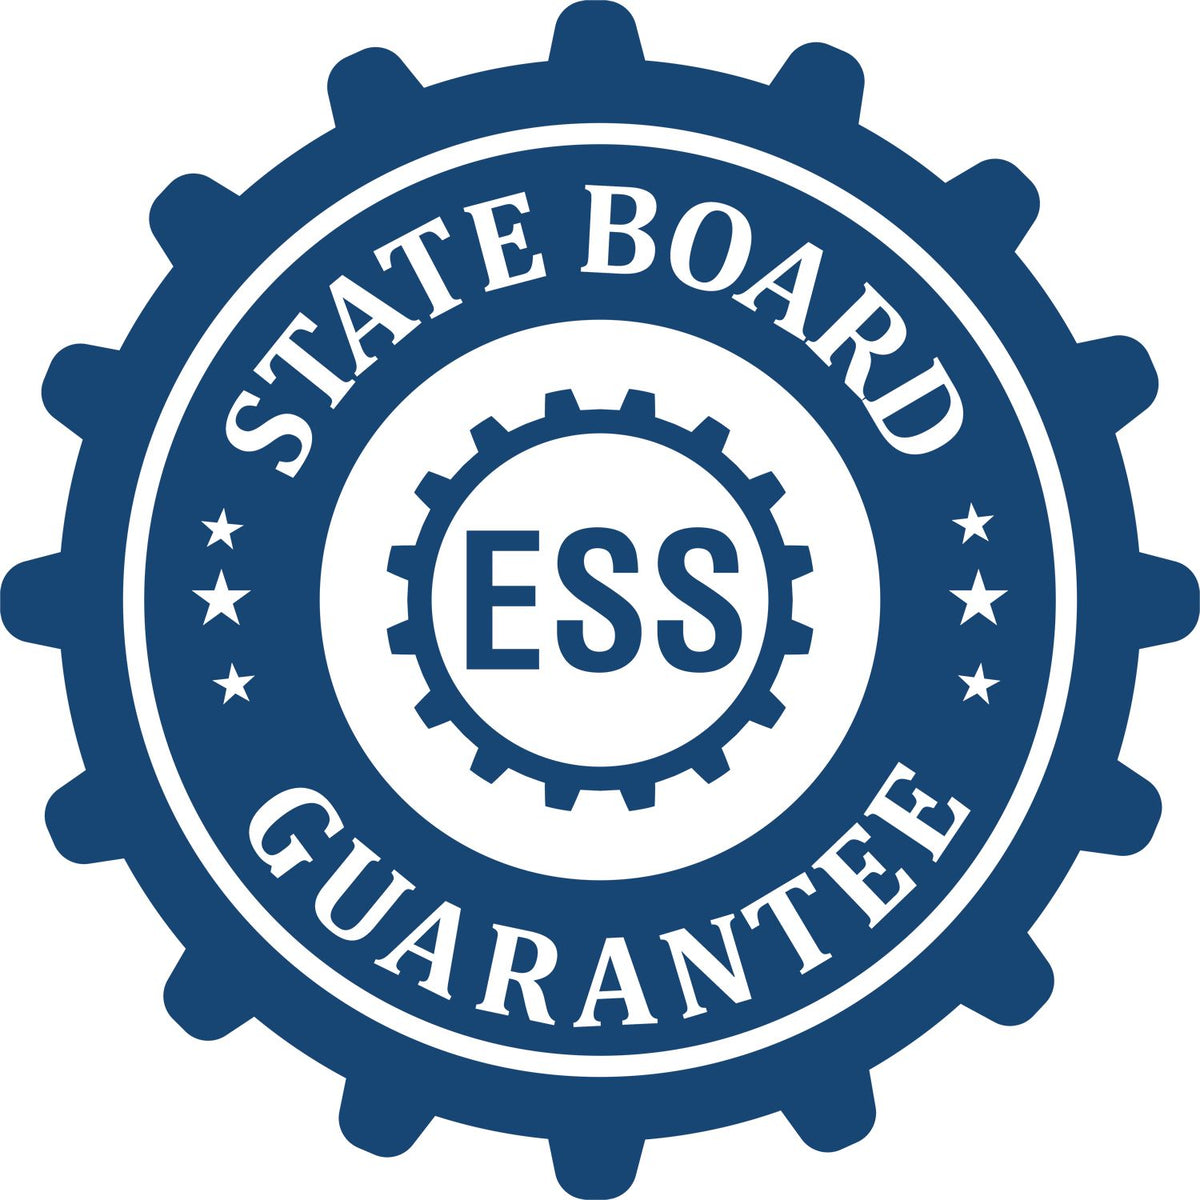 An emblem in a gear shape illustrating a state board guarantee for the Handheld Maryland Land Surveyor Seal product.